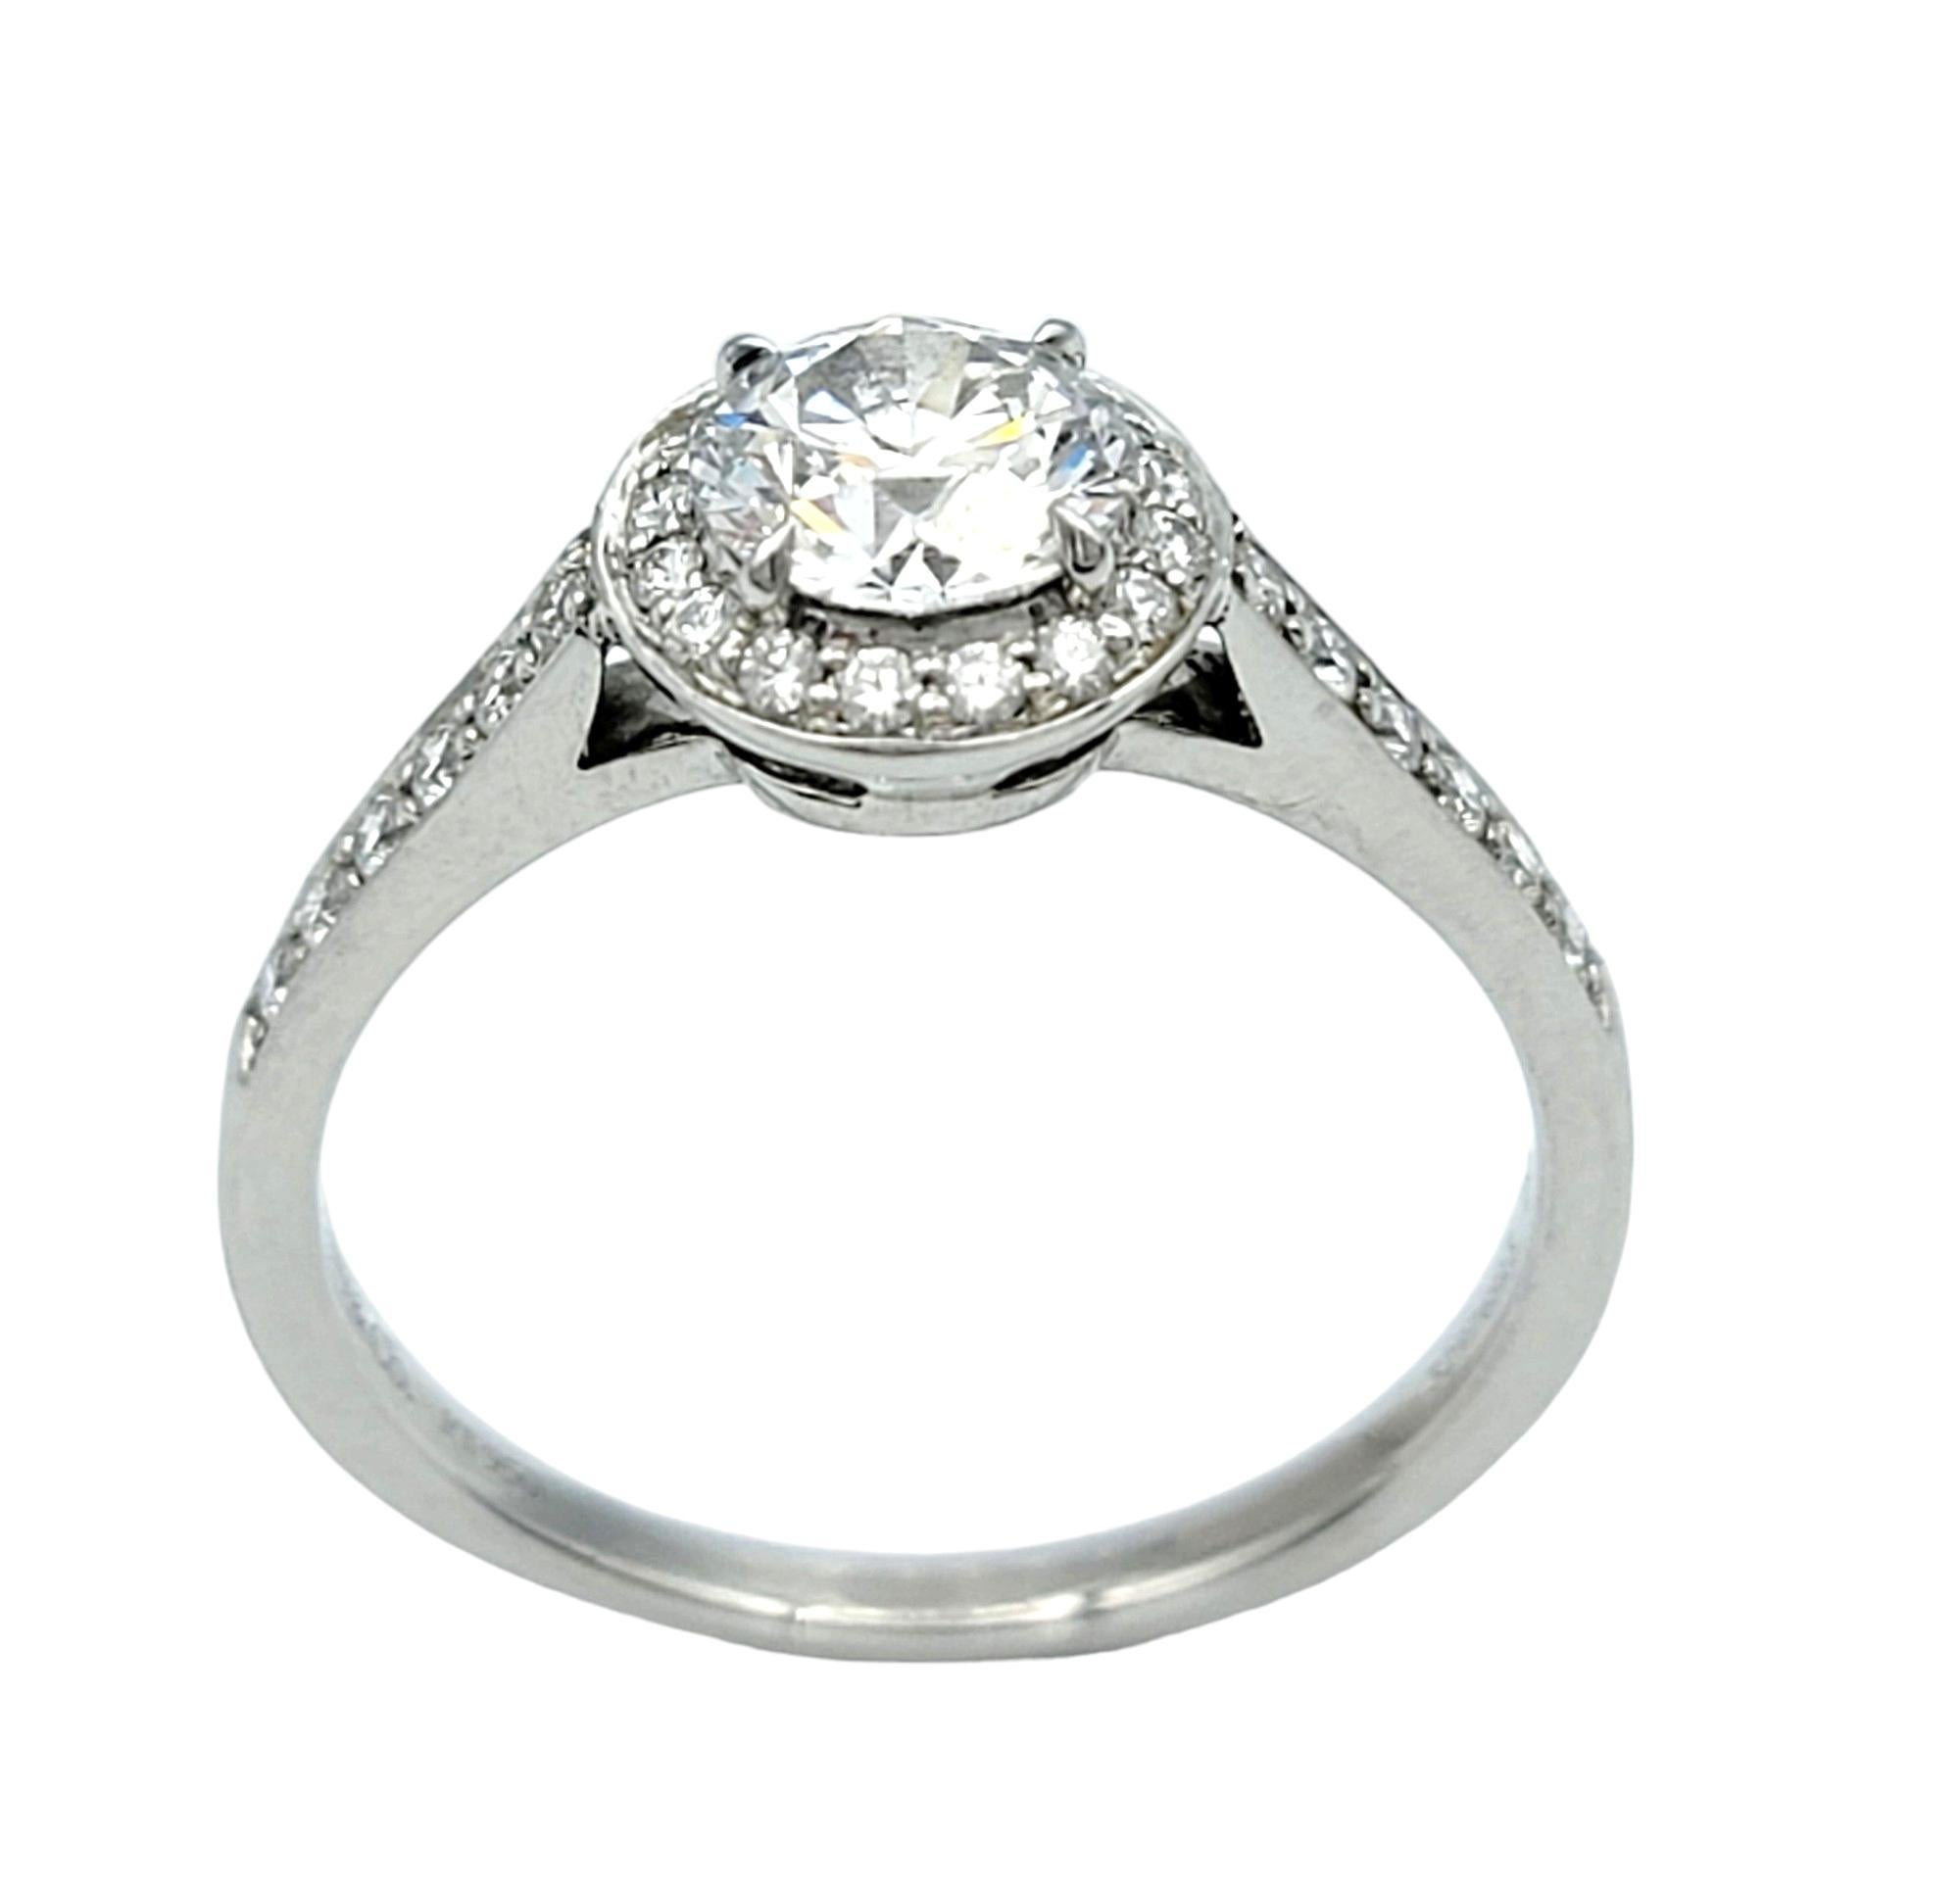 Tiffany & Co. Legacy Round .70 Carat Diamond with Halo Engagement Ring Platinum In Excellent Condition For Sale In Scottsdale, AZ